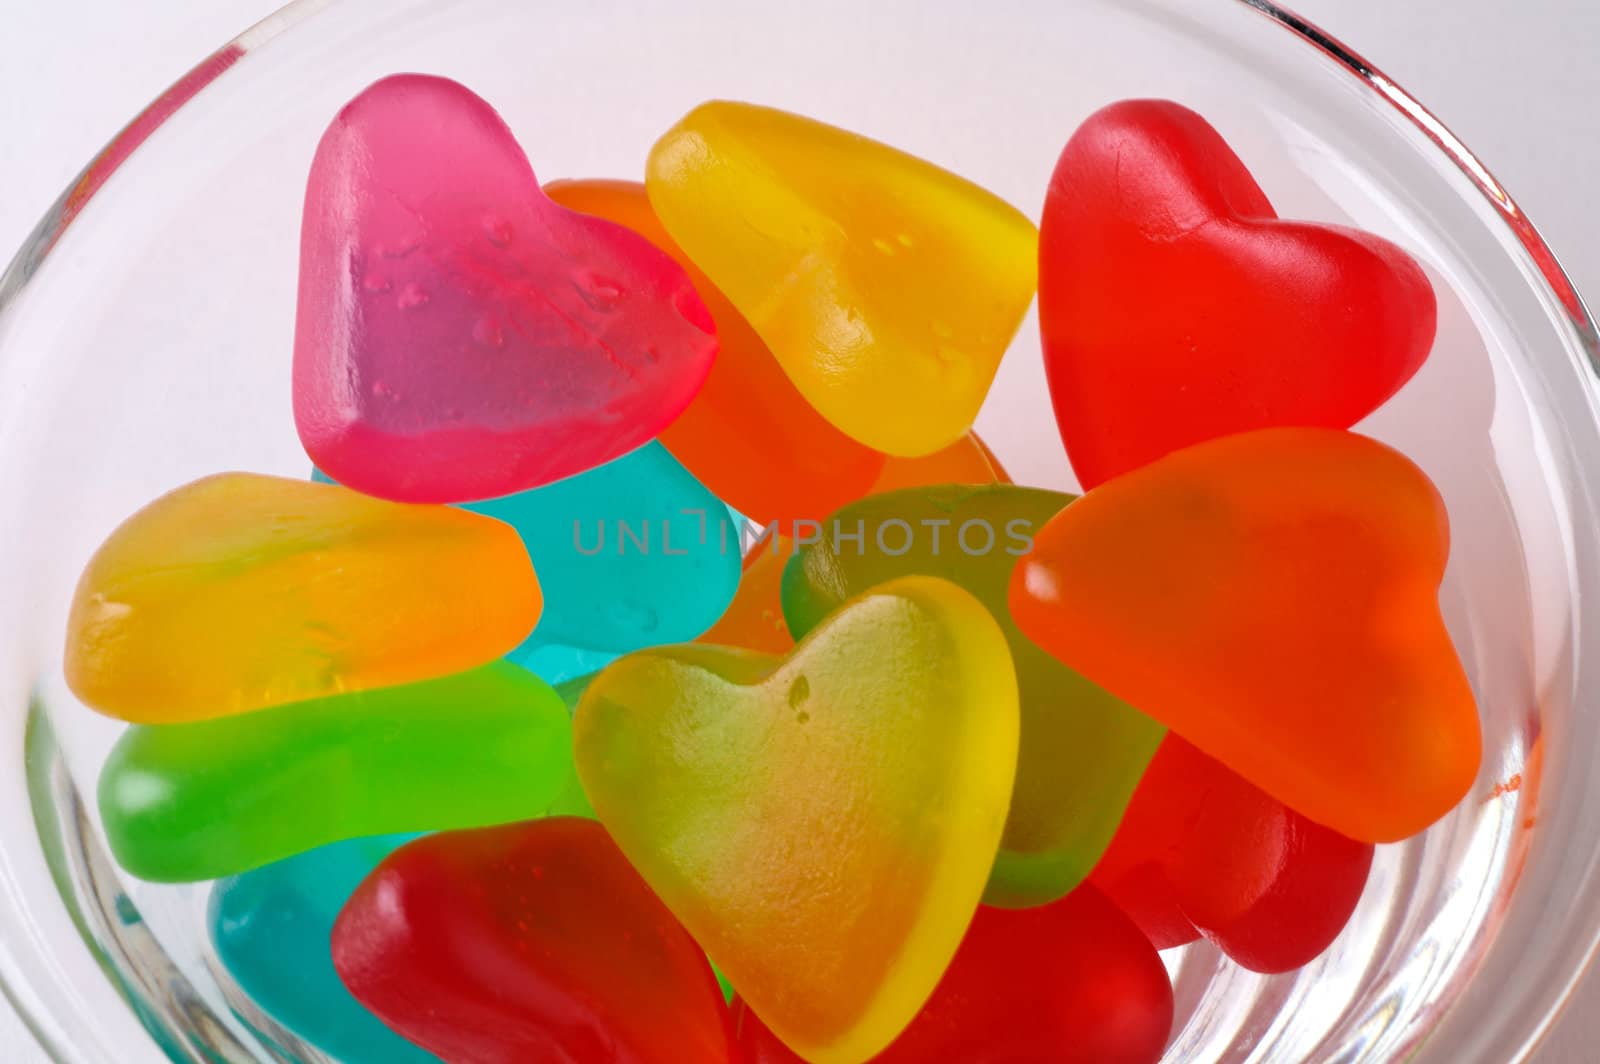 Heart shaped colored candies (Valentine)  in a glass bowl